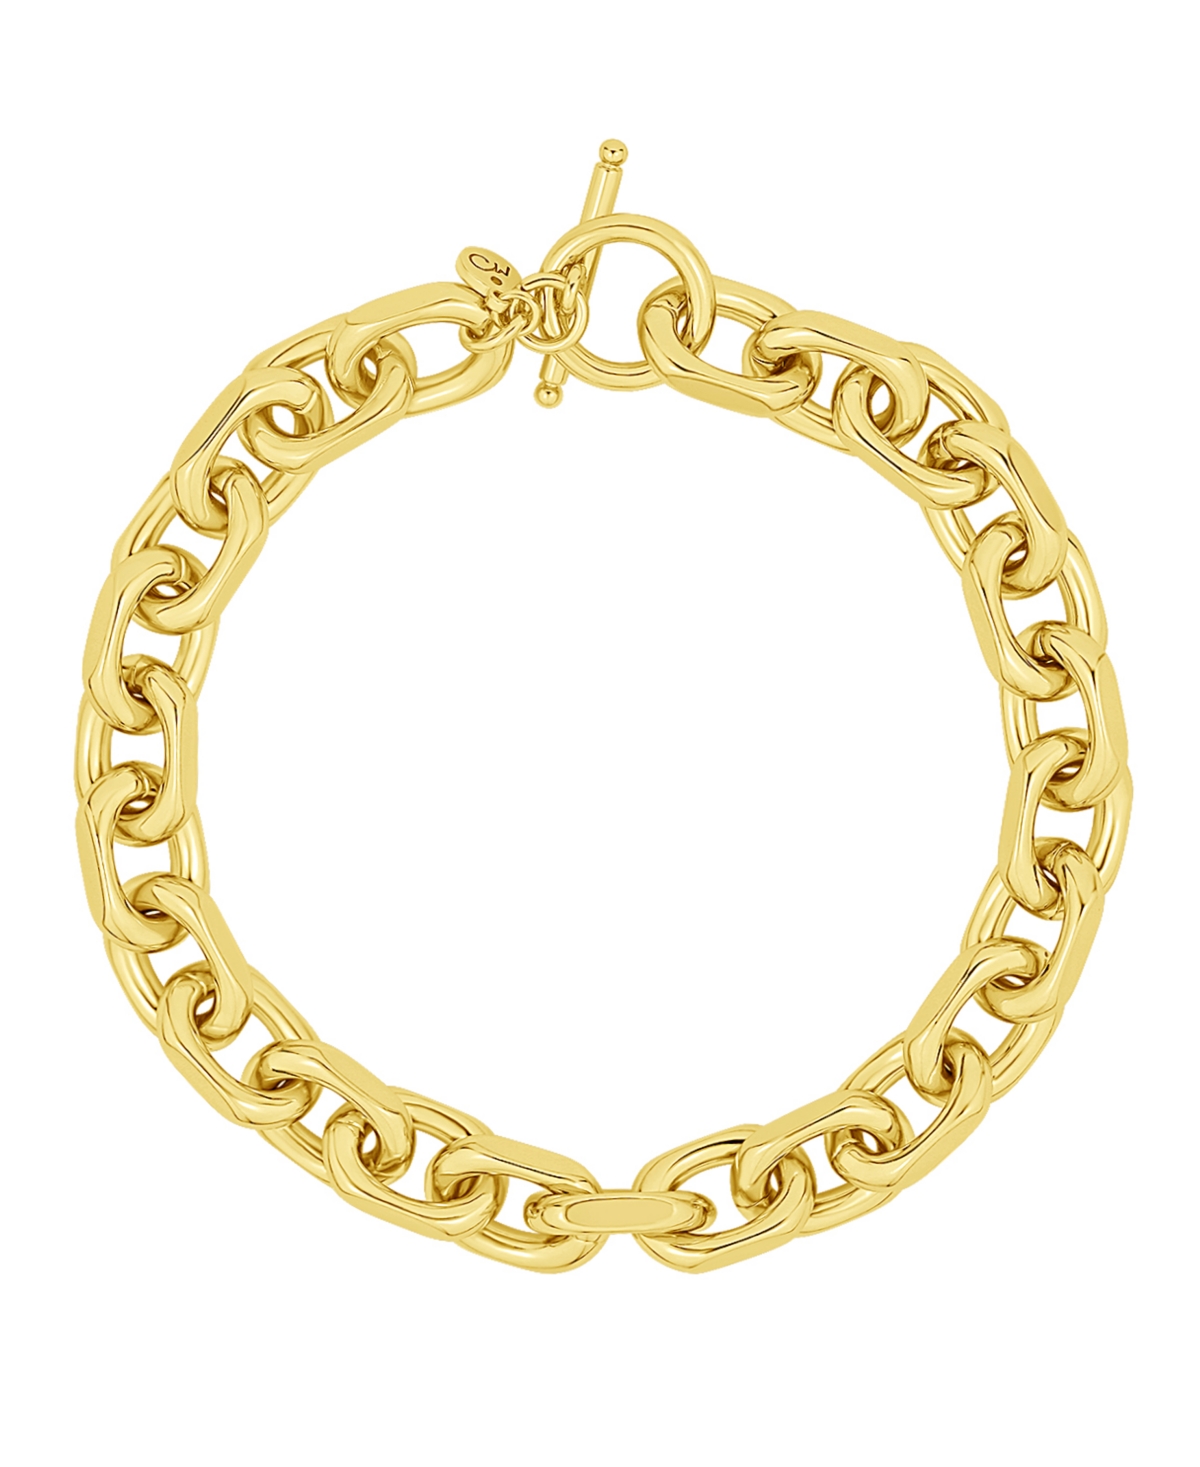 Silver-Plated or 18K Gold-Plated Oval Chain Toggle Bracelet - Gold